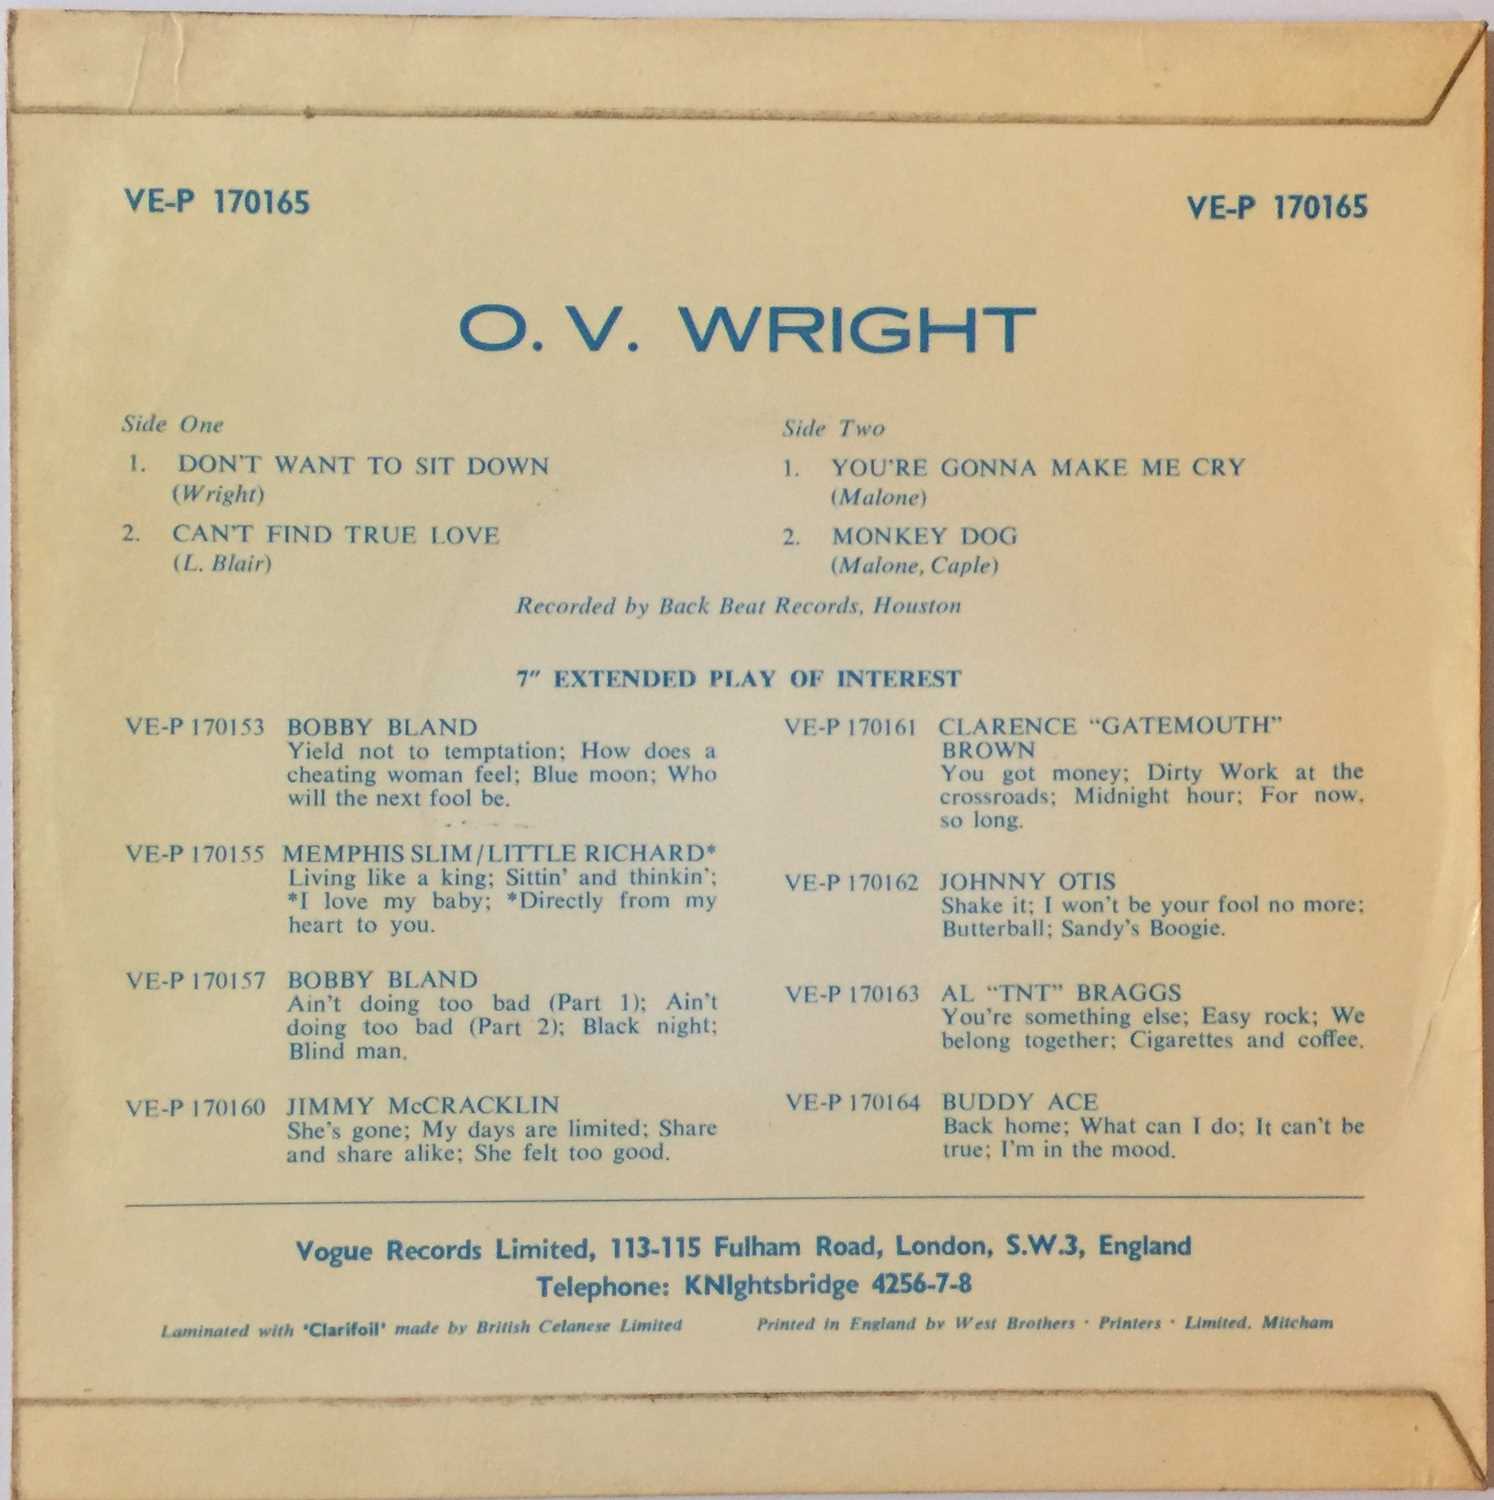 OV Wright - Can't Find True Love (UK 7" - VE-P 170165) - Image 2 of 4